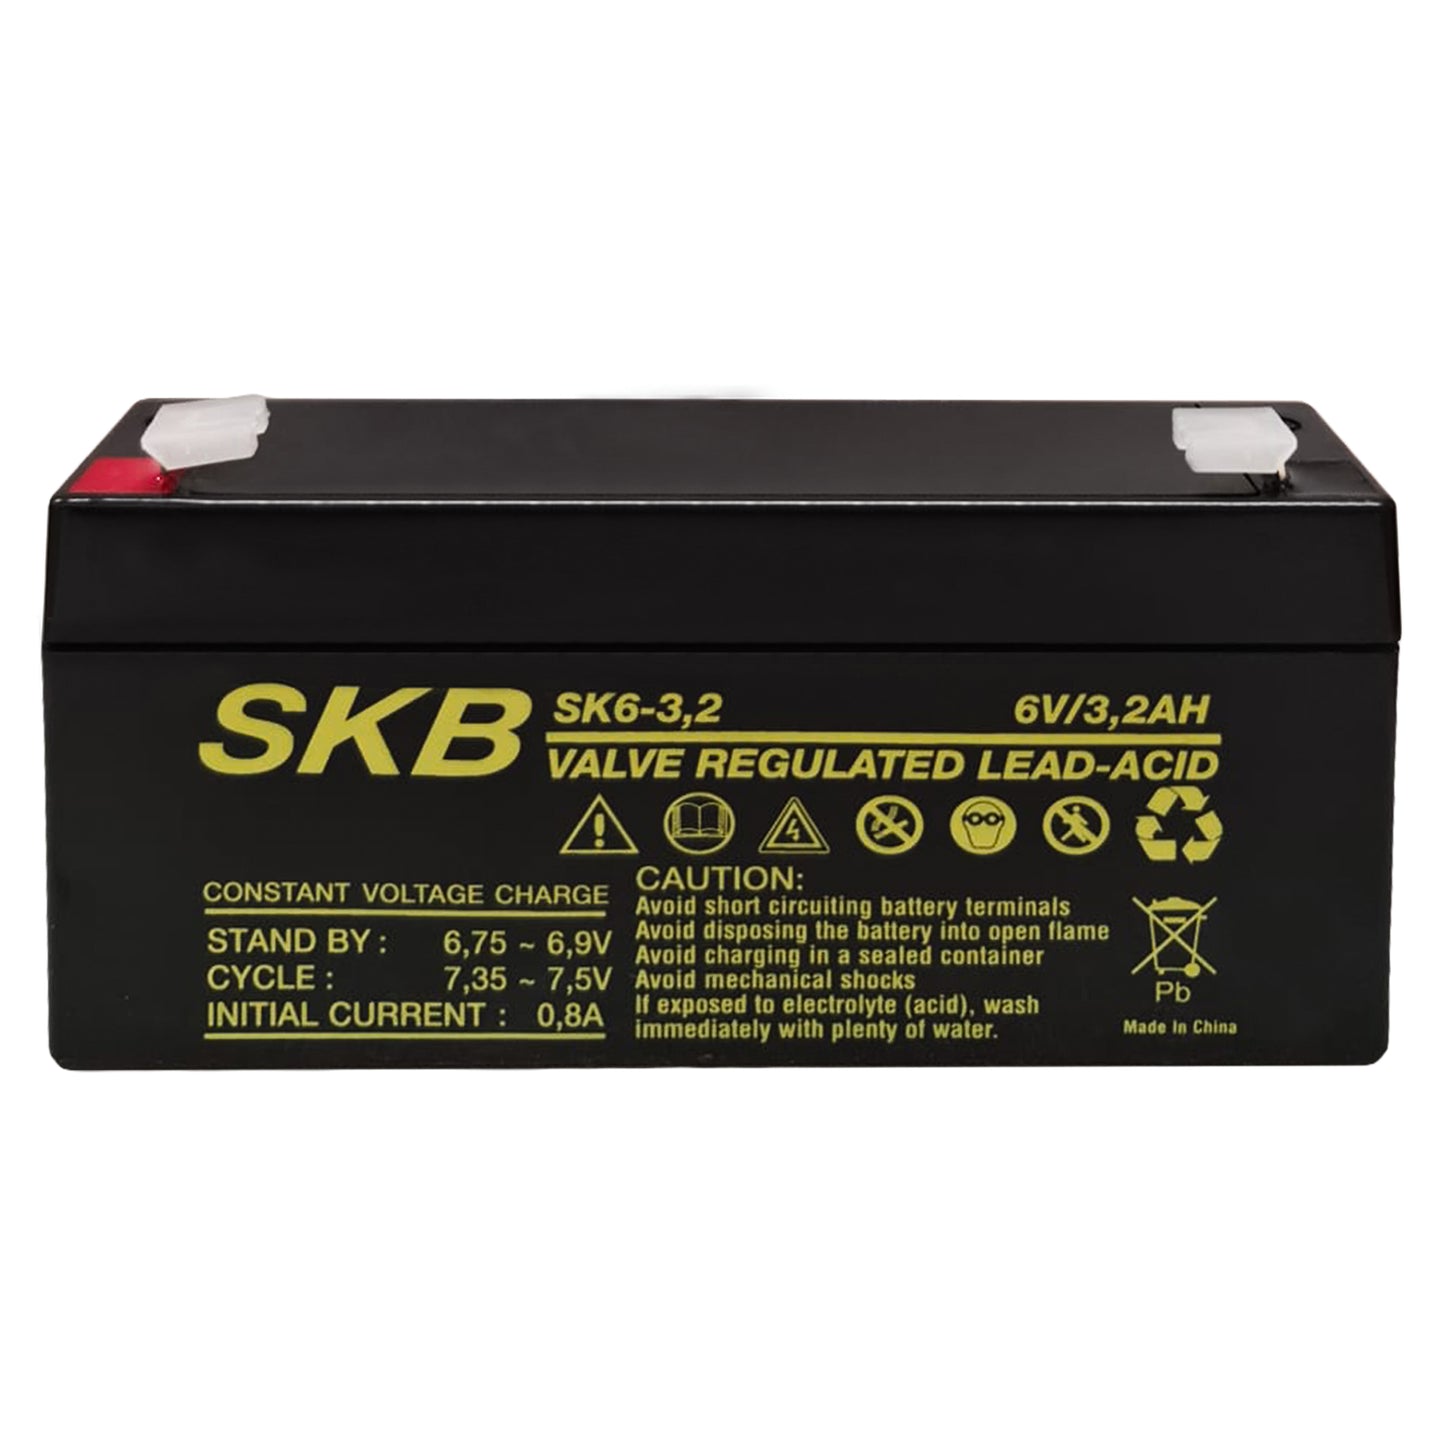 SKB Rechargeable lead acid battery 6V 3.2AH hermetic battery SK series, AGM flat plate technology regulated with valve